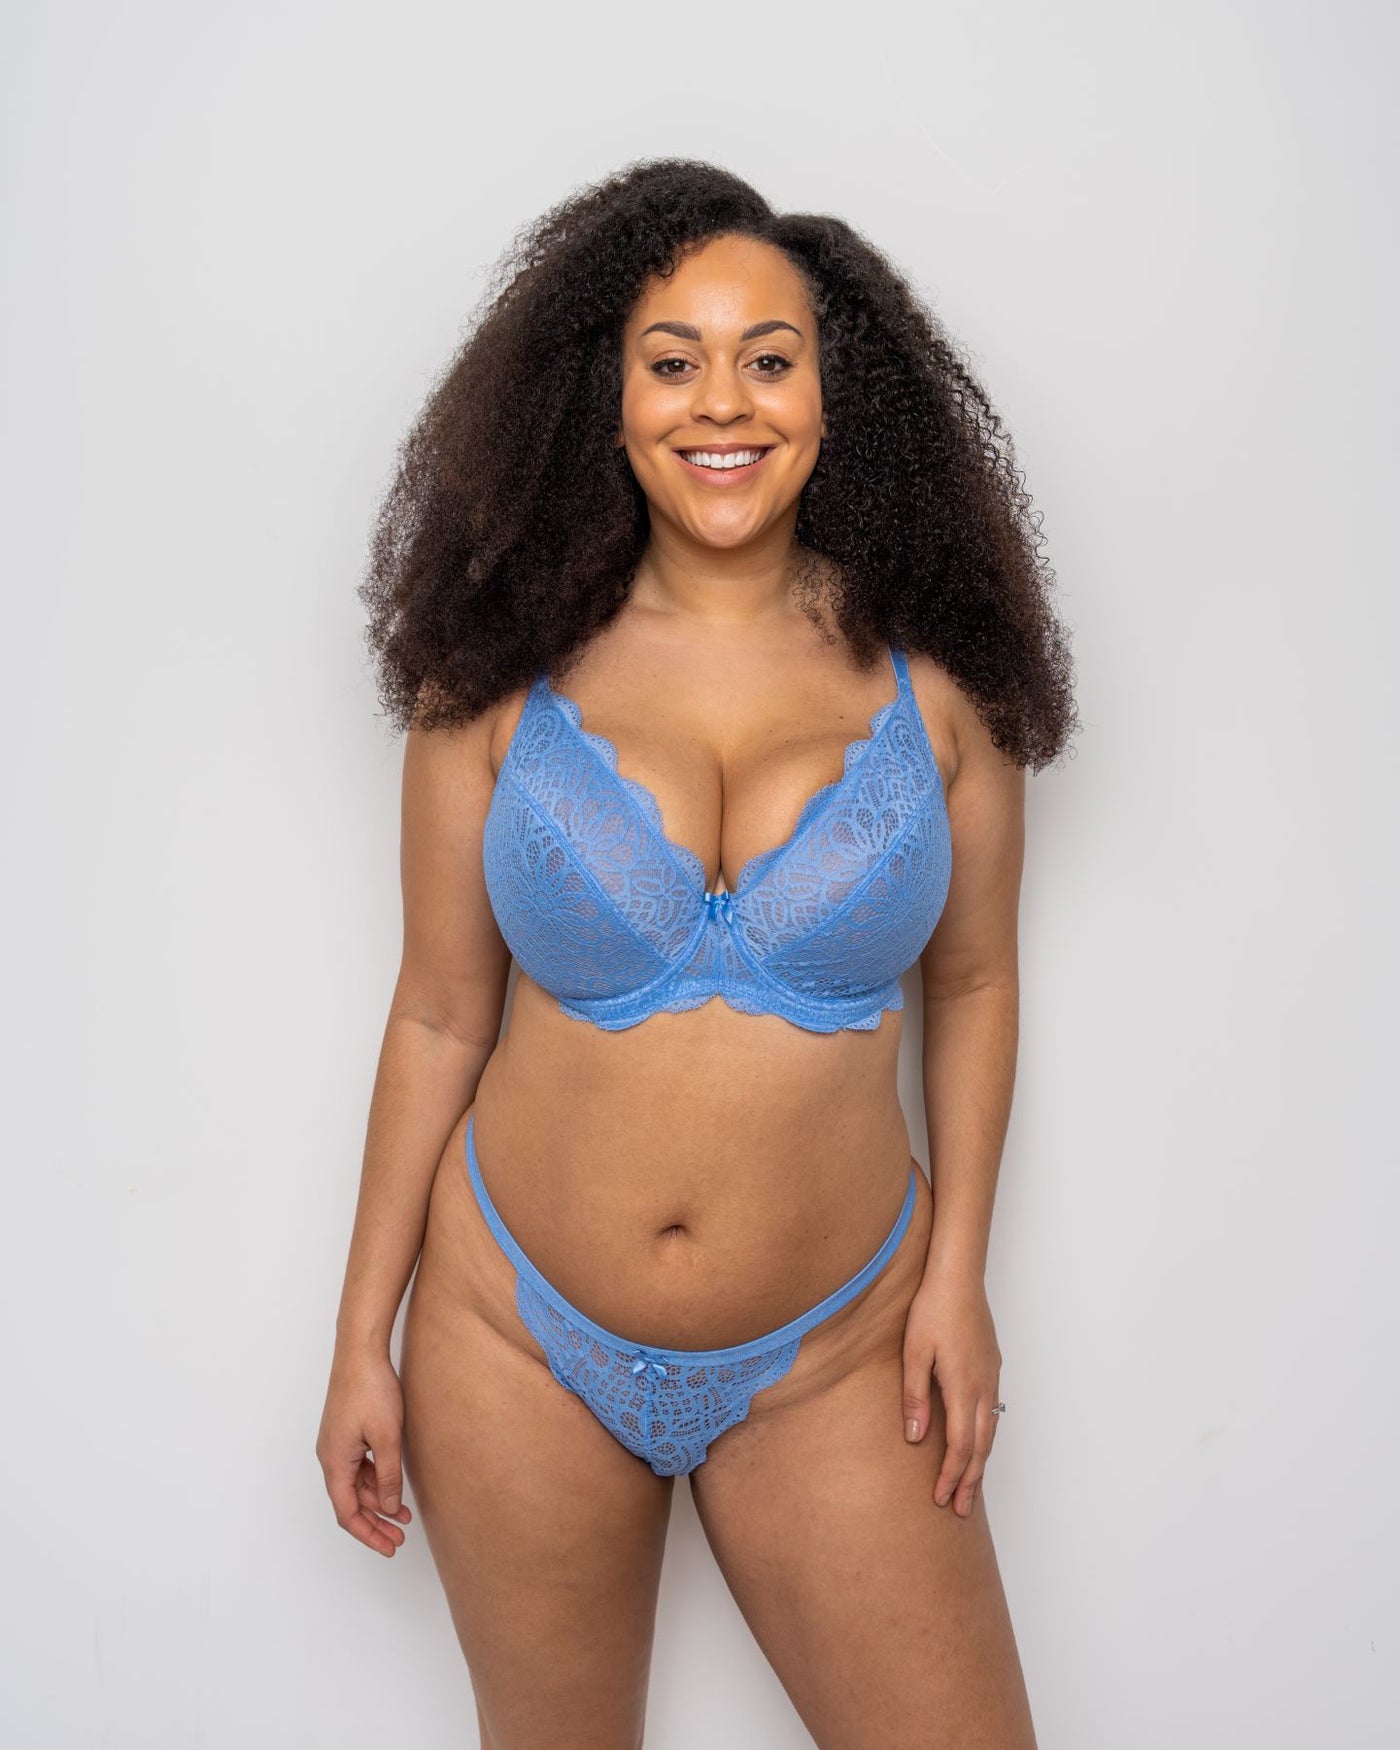 Ivory Rose Unpadded Floral Lace Bralette in Blue